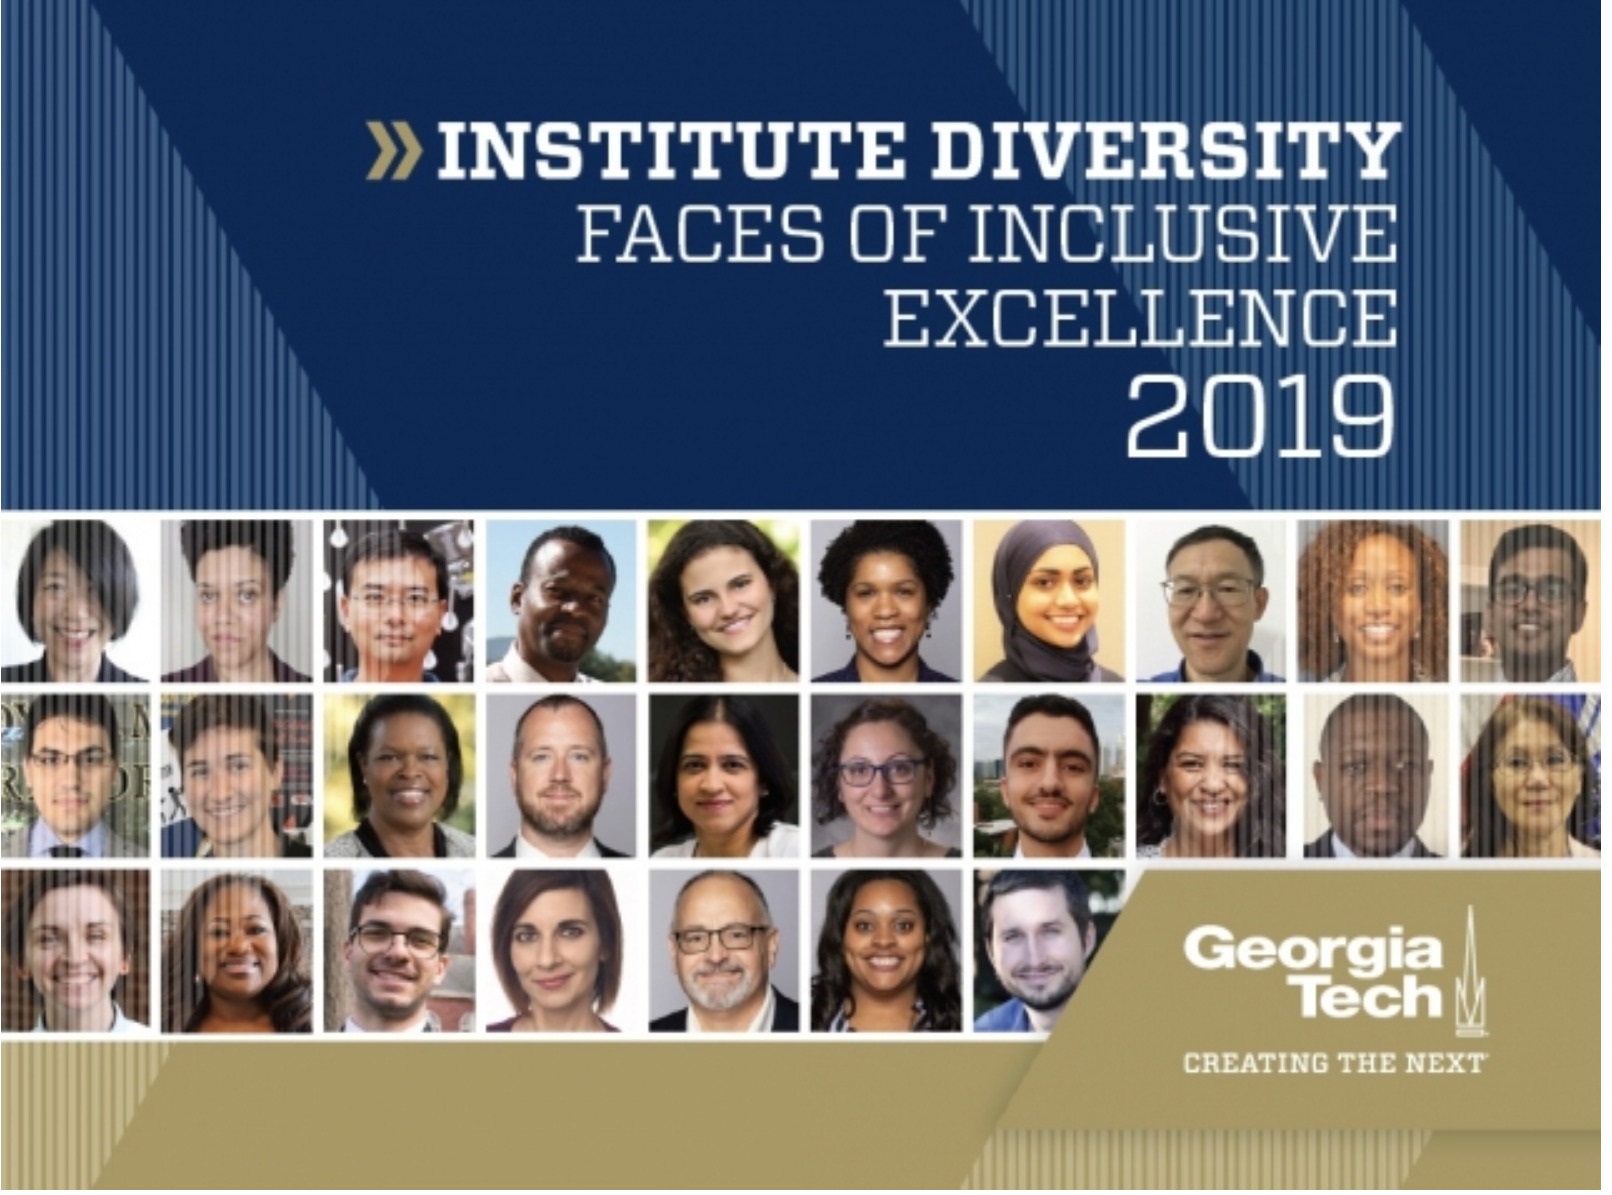 https://campaign-image.com/zohocampaigns/469179000001869048_zc_v81_dondge_faces_of_inclusive_excellence_gt.jpg